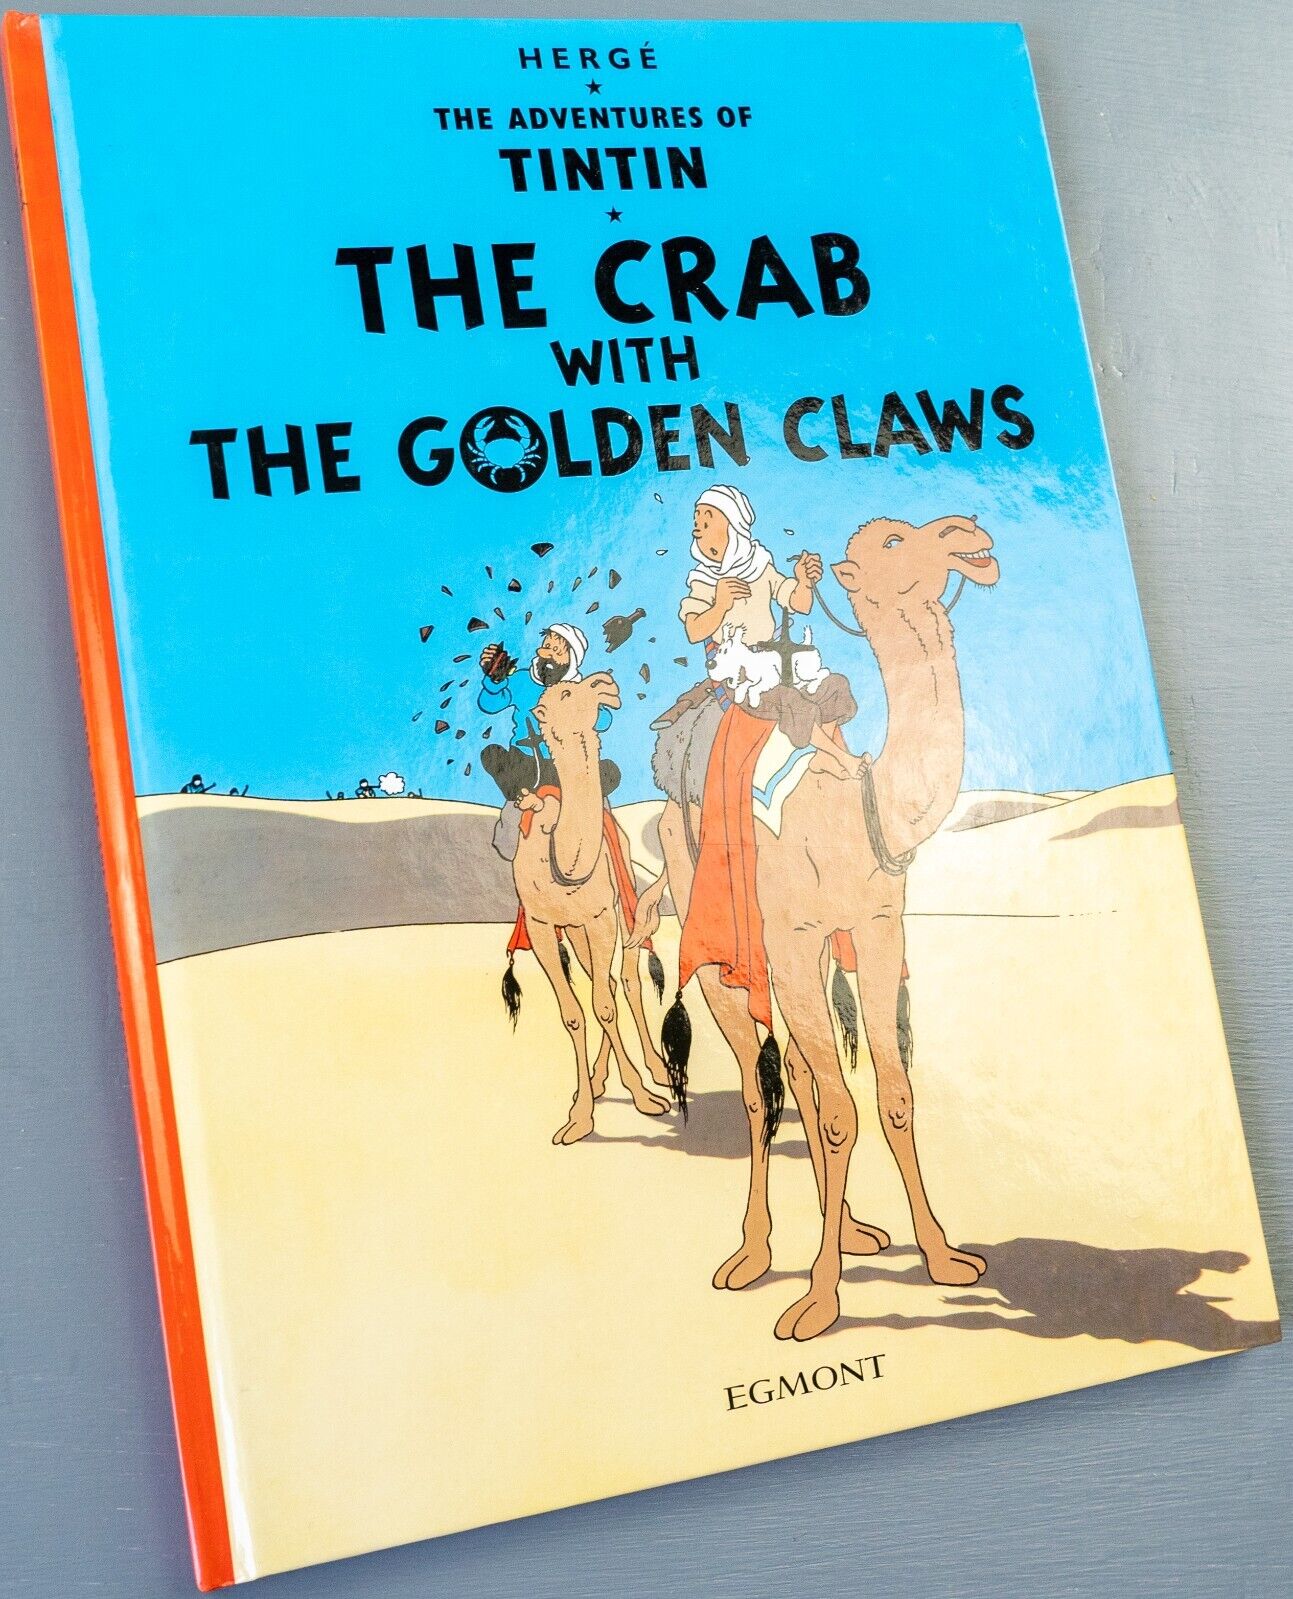 The Crab with the Golden Claws: Egmont 2000s Hardback Book UK Edition